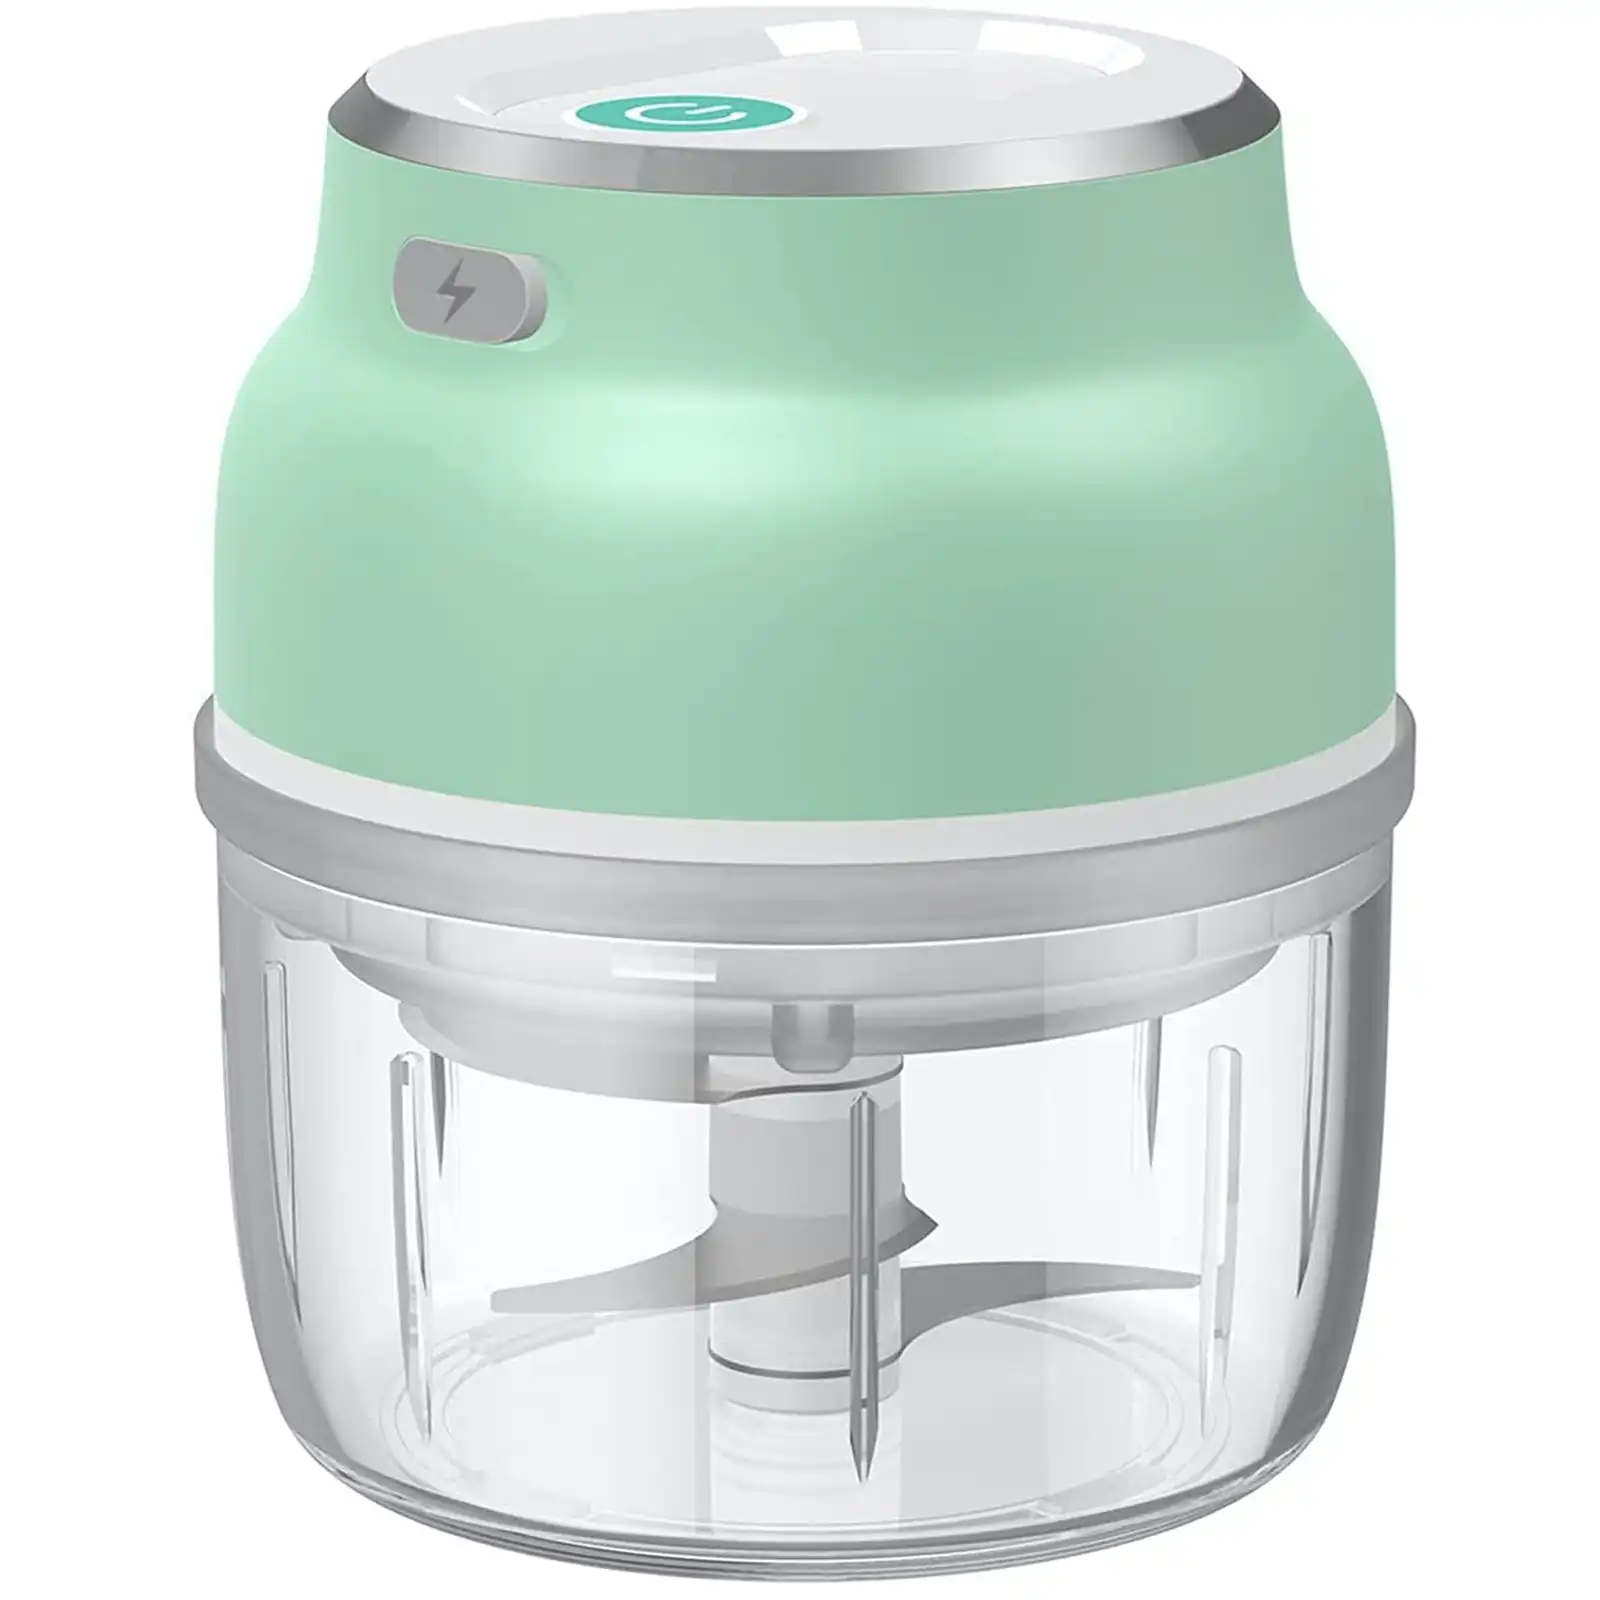 TODO Portable Mini Food Chopper Processor Rechargeable Battery 3.7V 22W Stainless Steel Blade